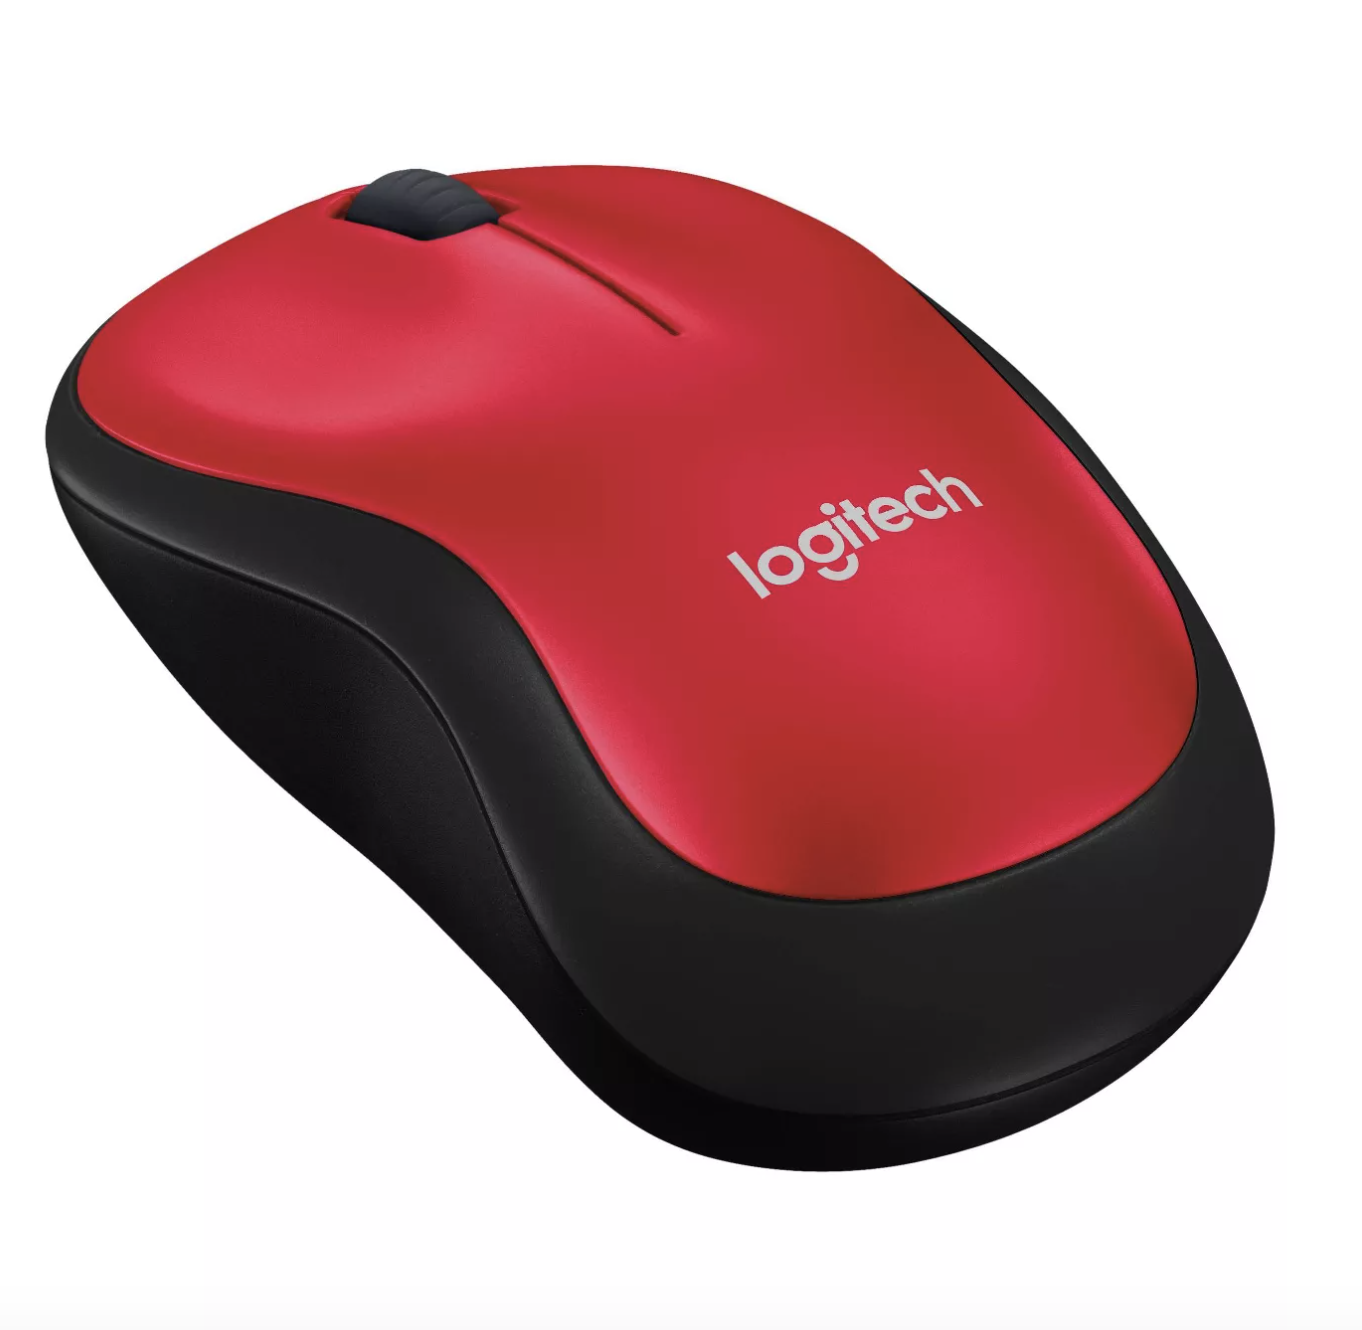 a red and black logitech mouse